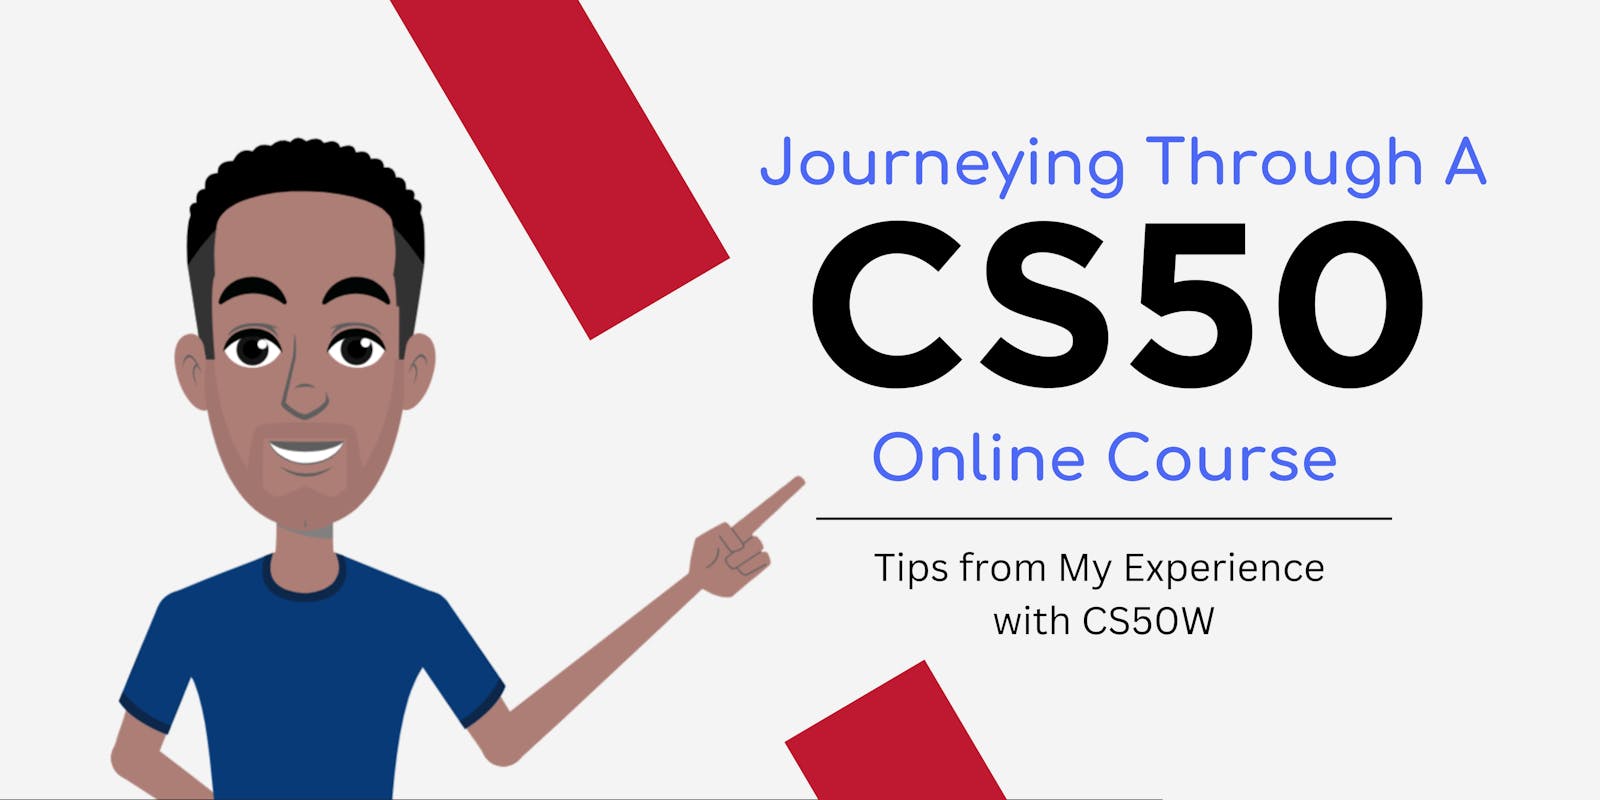 Journeying Through a CS50 Online Course: Tips from My Experience with CS50W and Earning Their Certificate